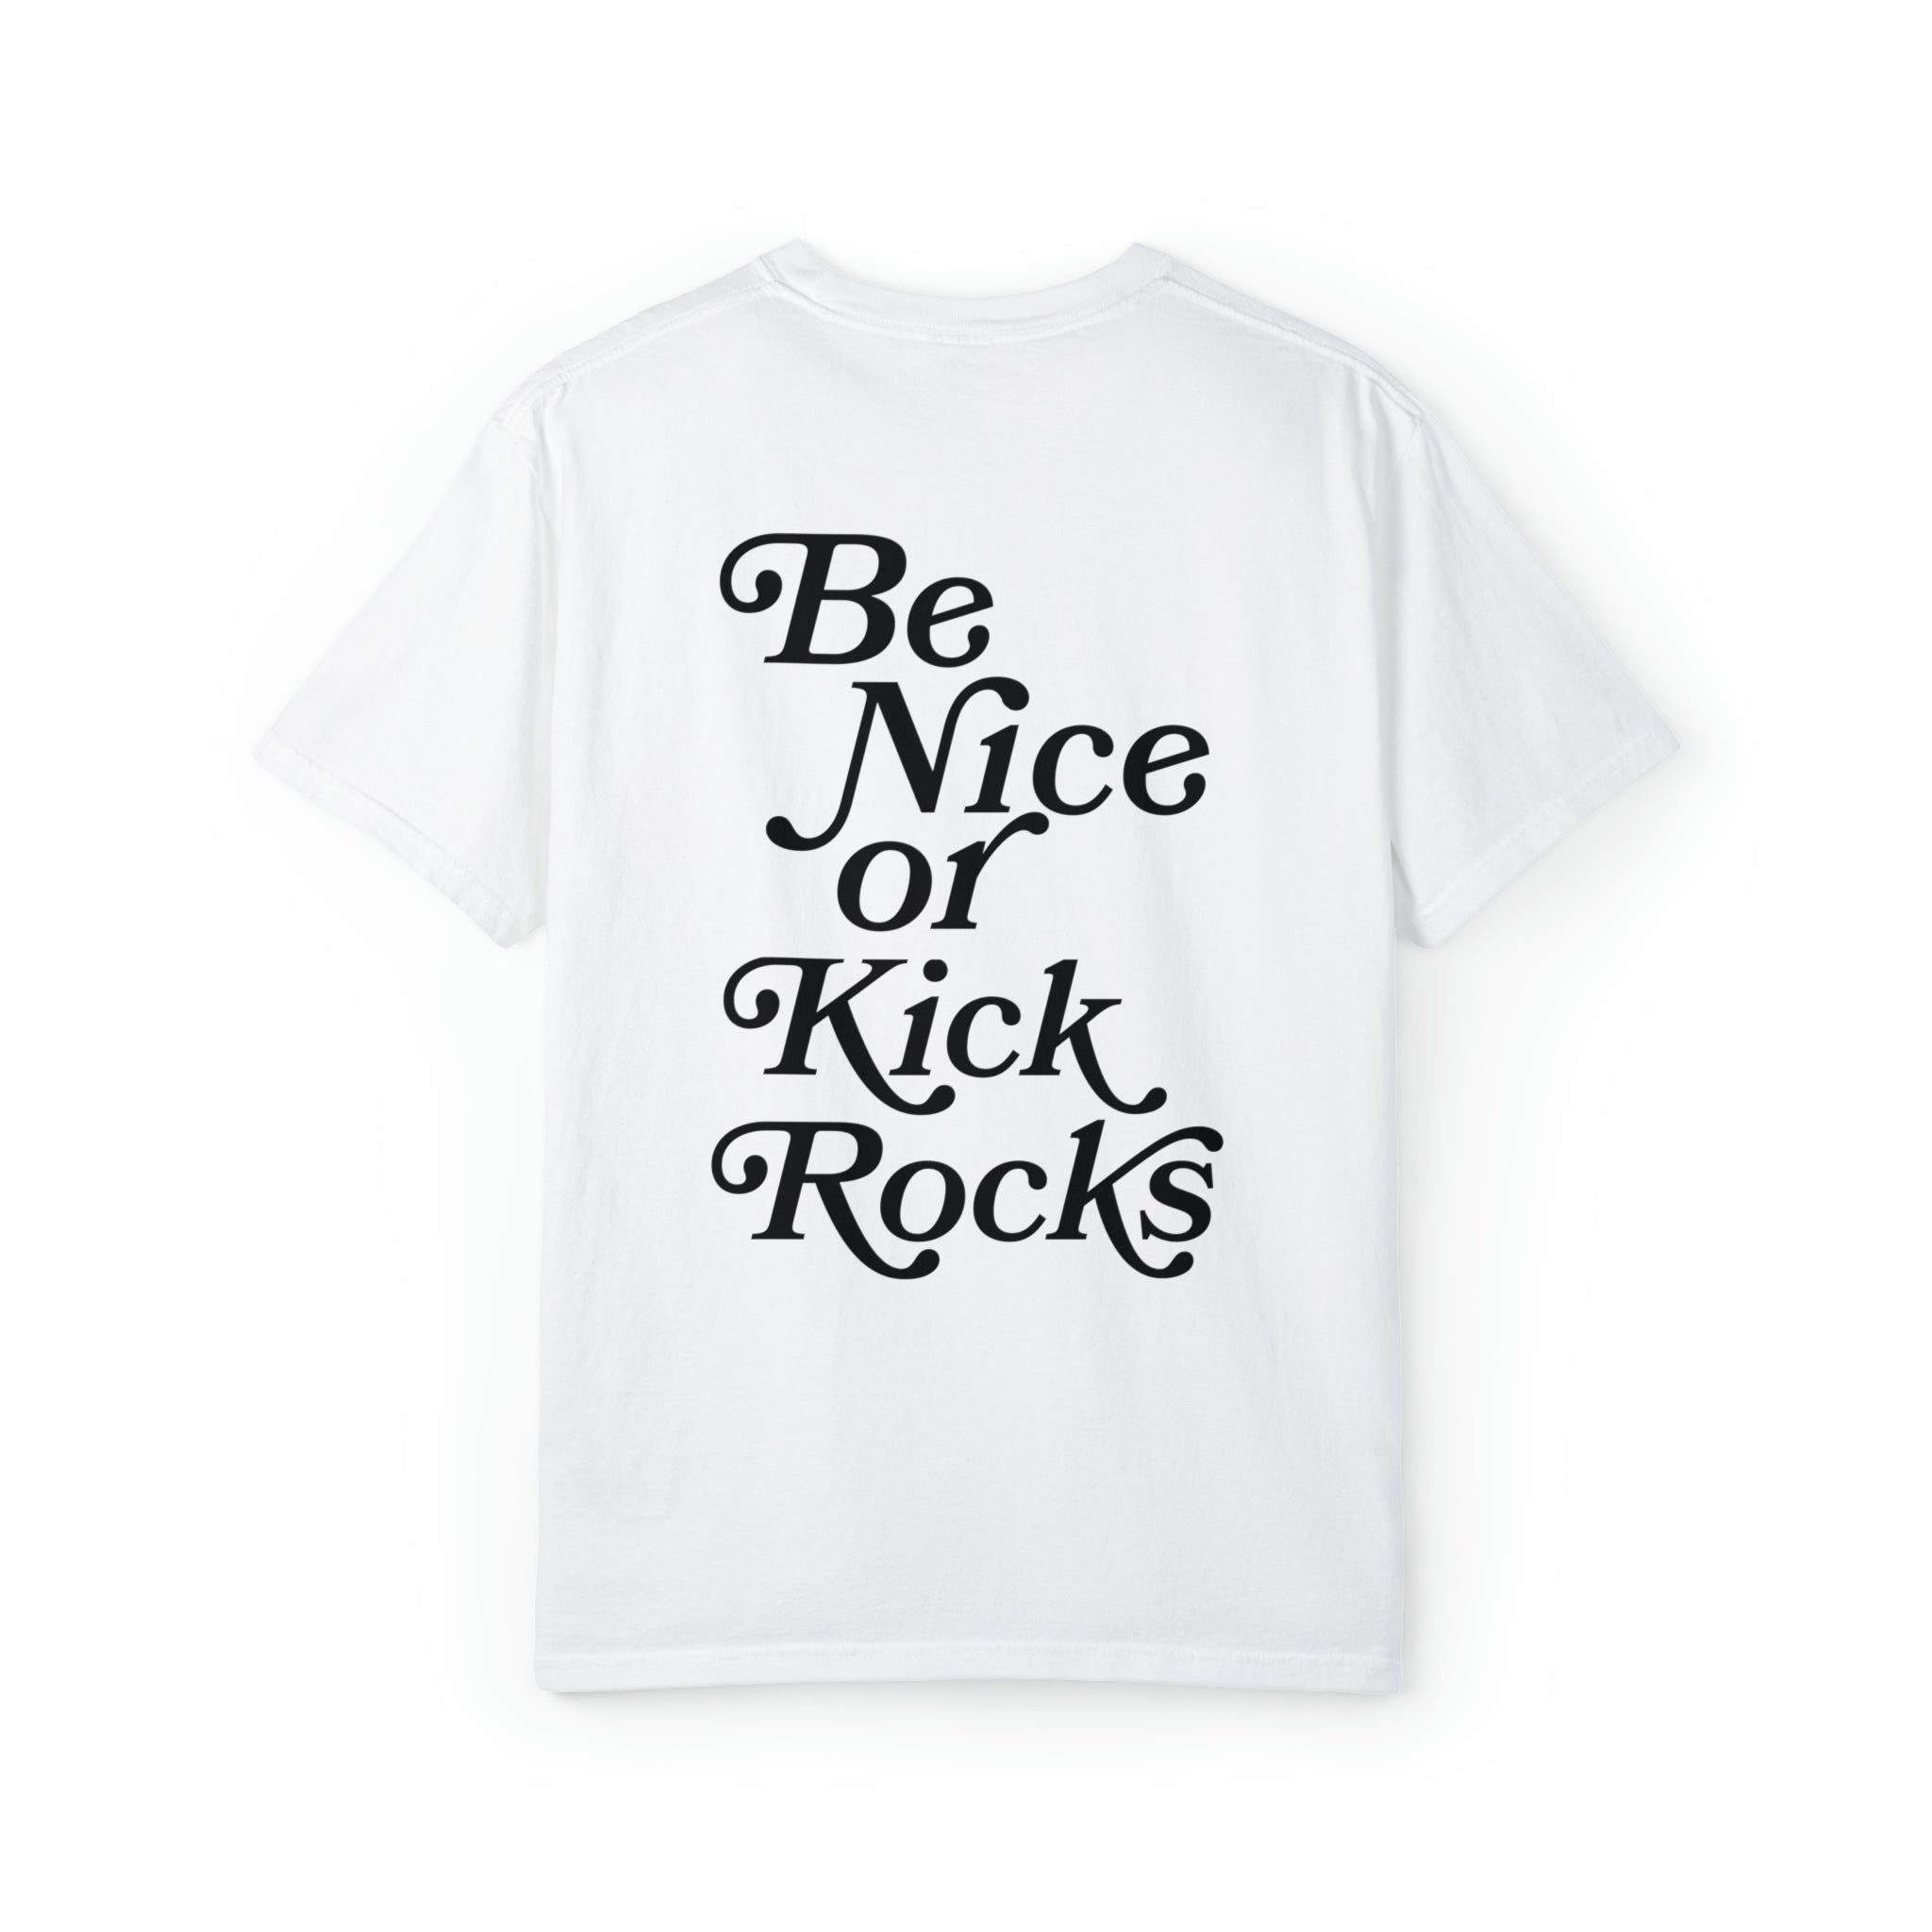  'Be Nice or Kick Rocks' Comfort Colors T-Shirt. Its soft fabric coupled with a bold slogan makes it a perfect blend of coziness and motivation for everyday wear.